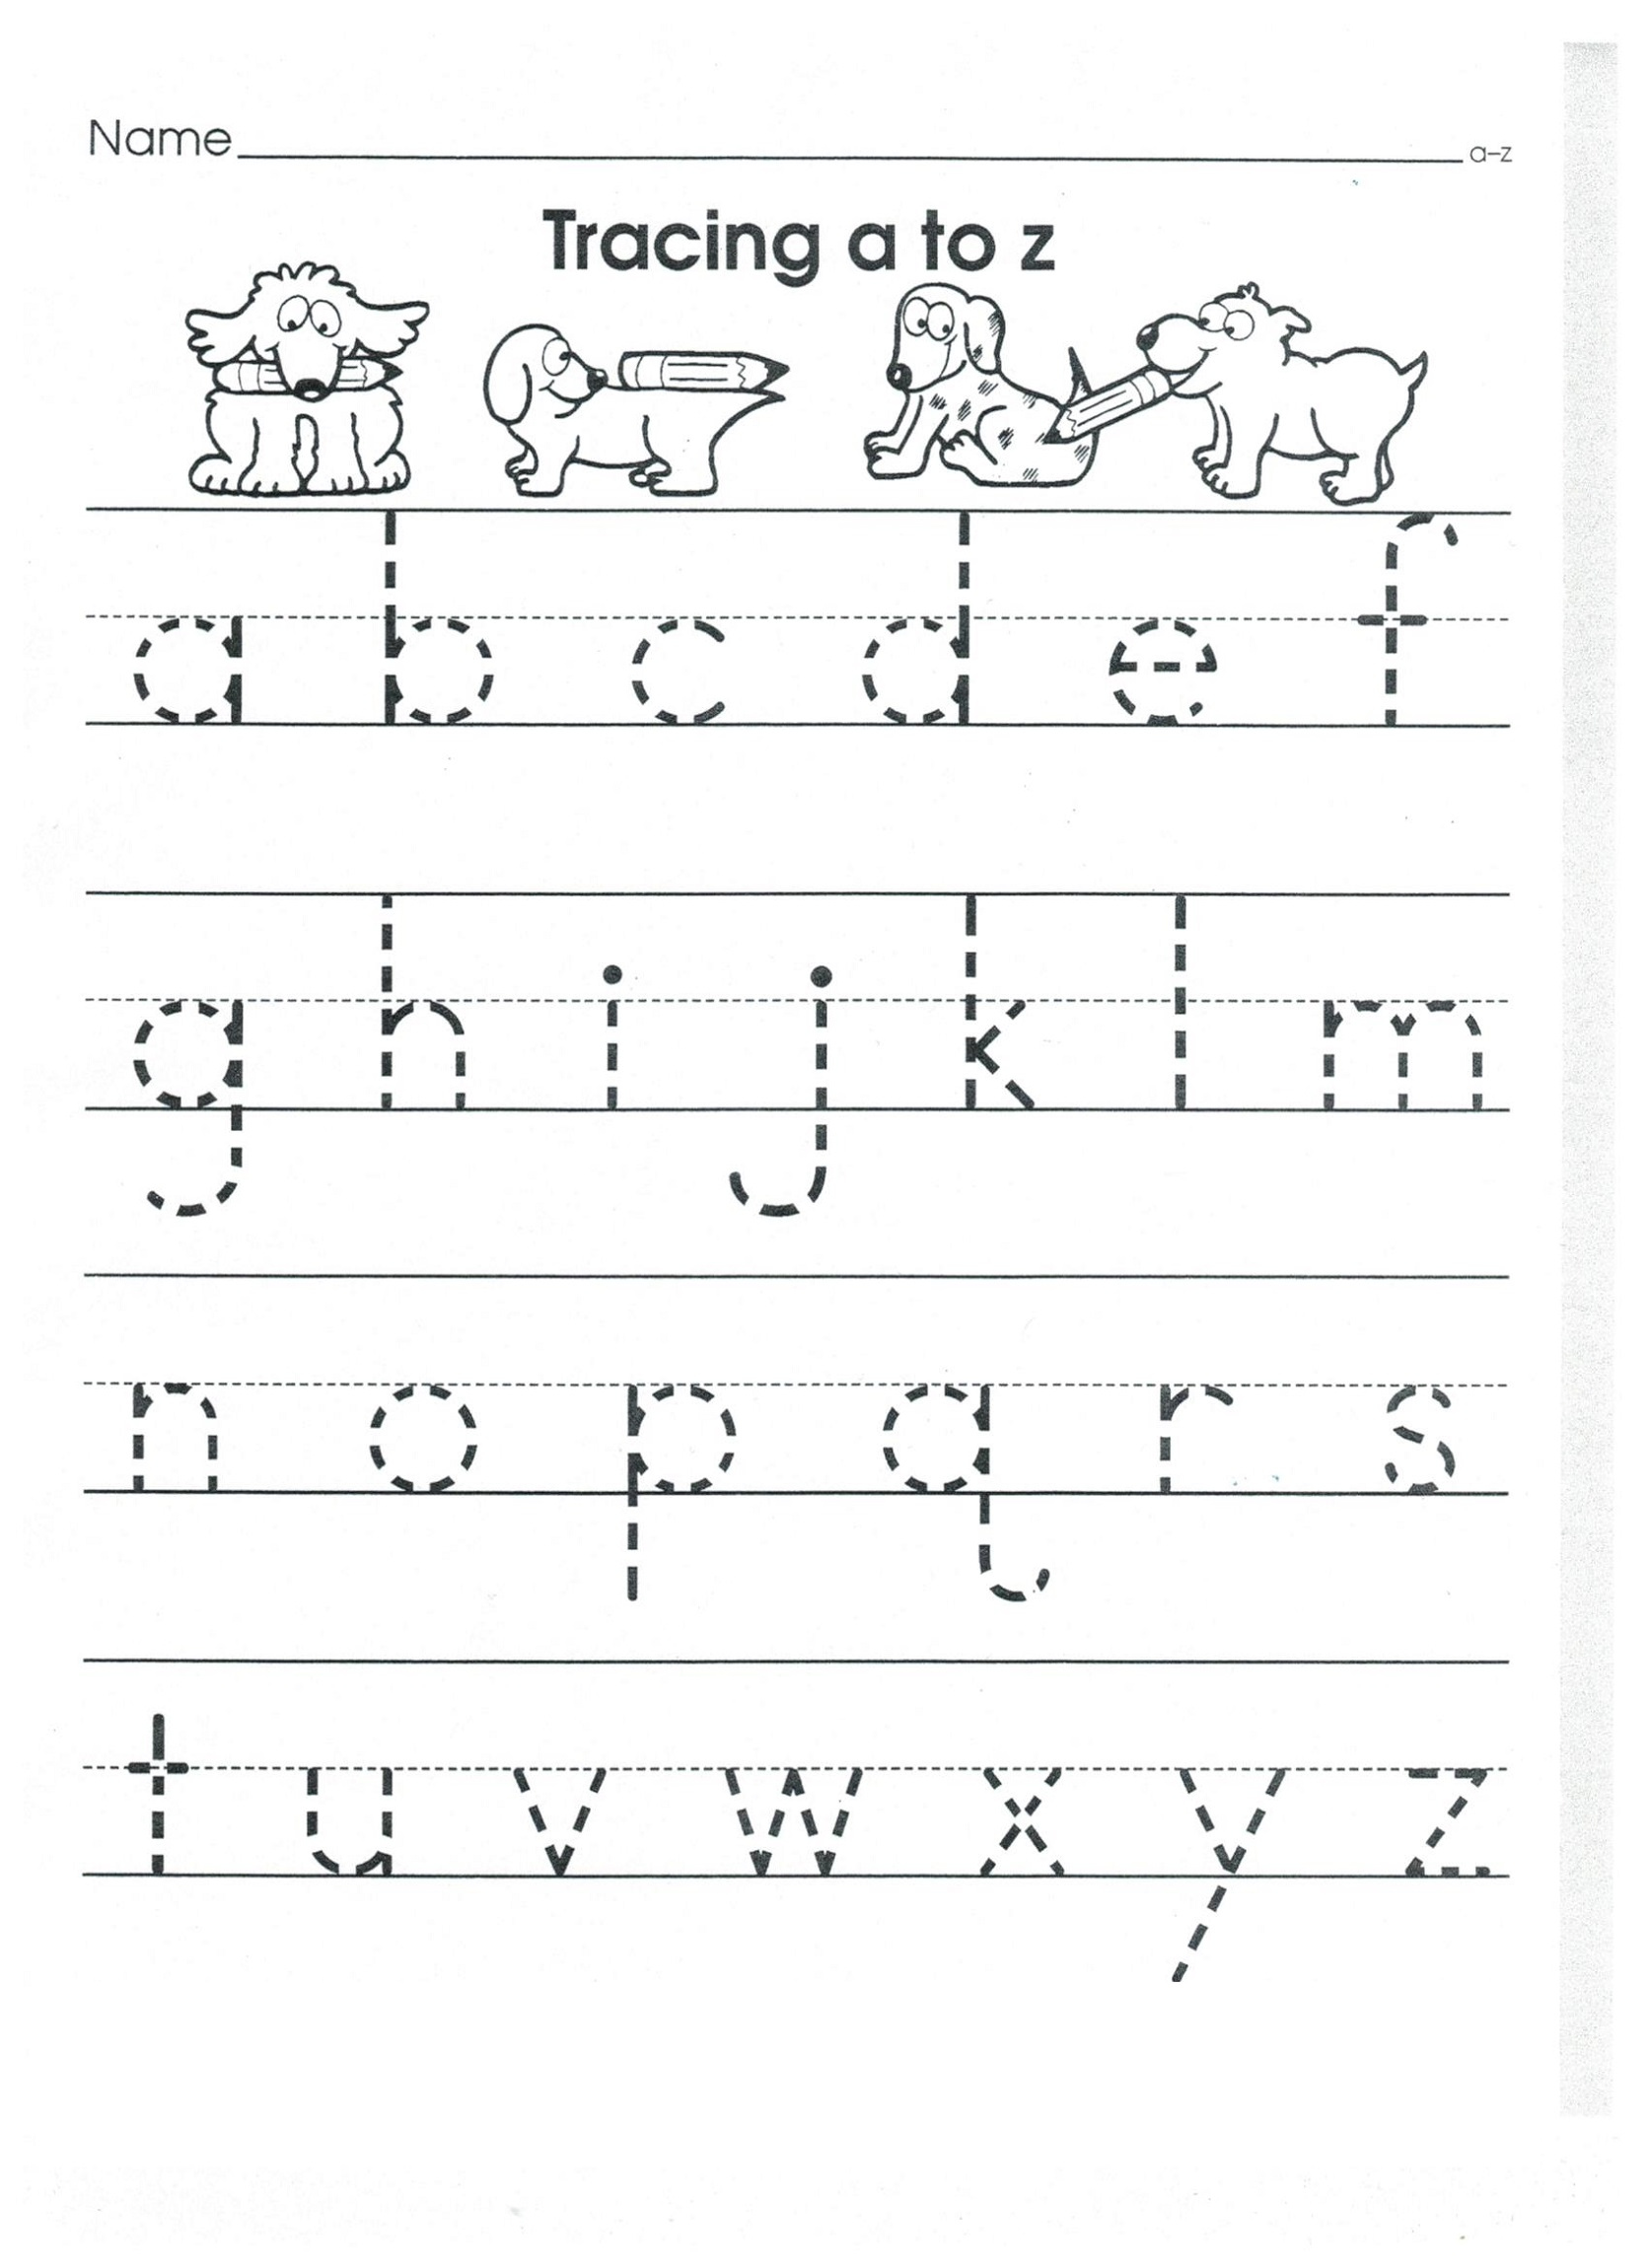 Practice Writing Lowercase Letter Worksheets 101 Activity